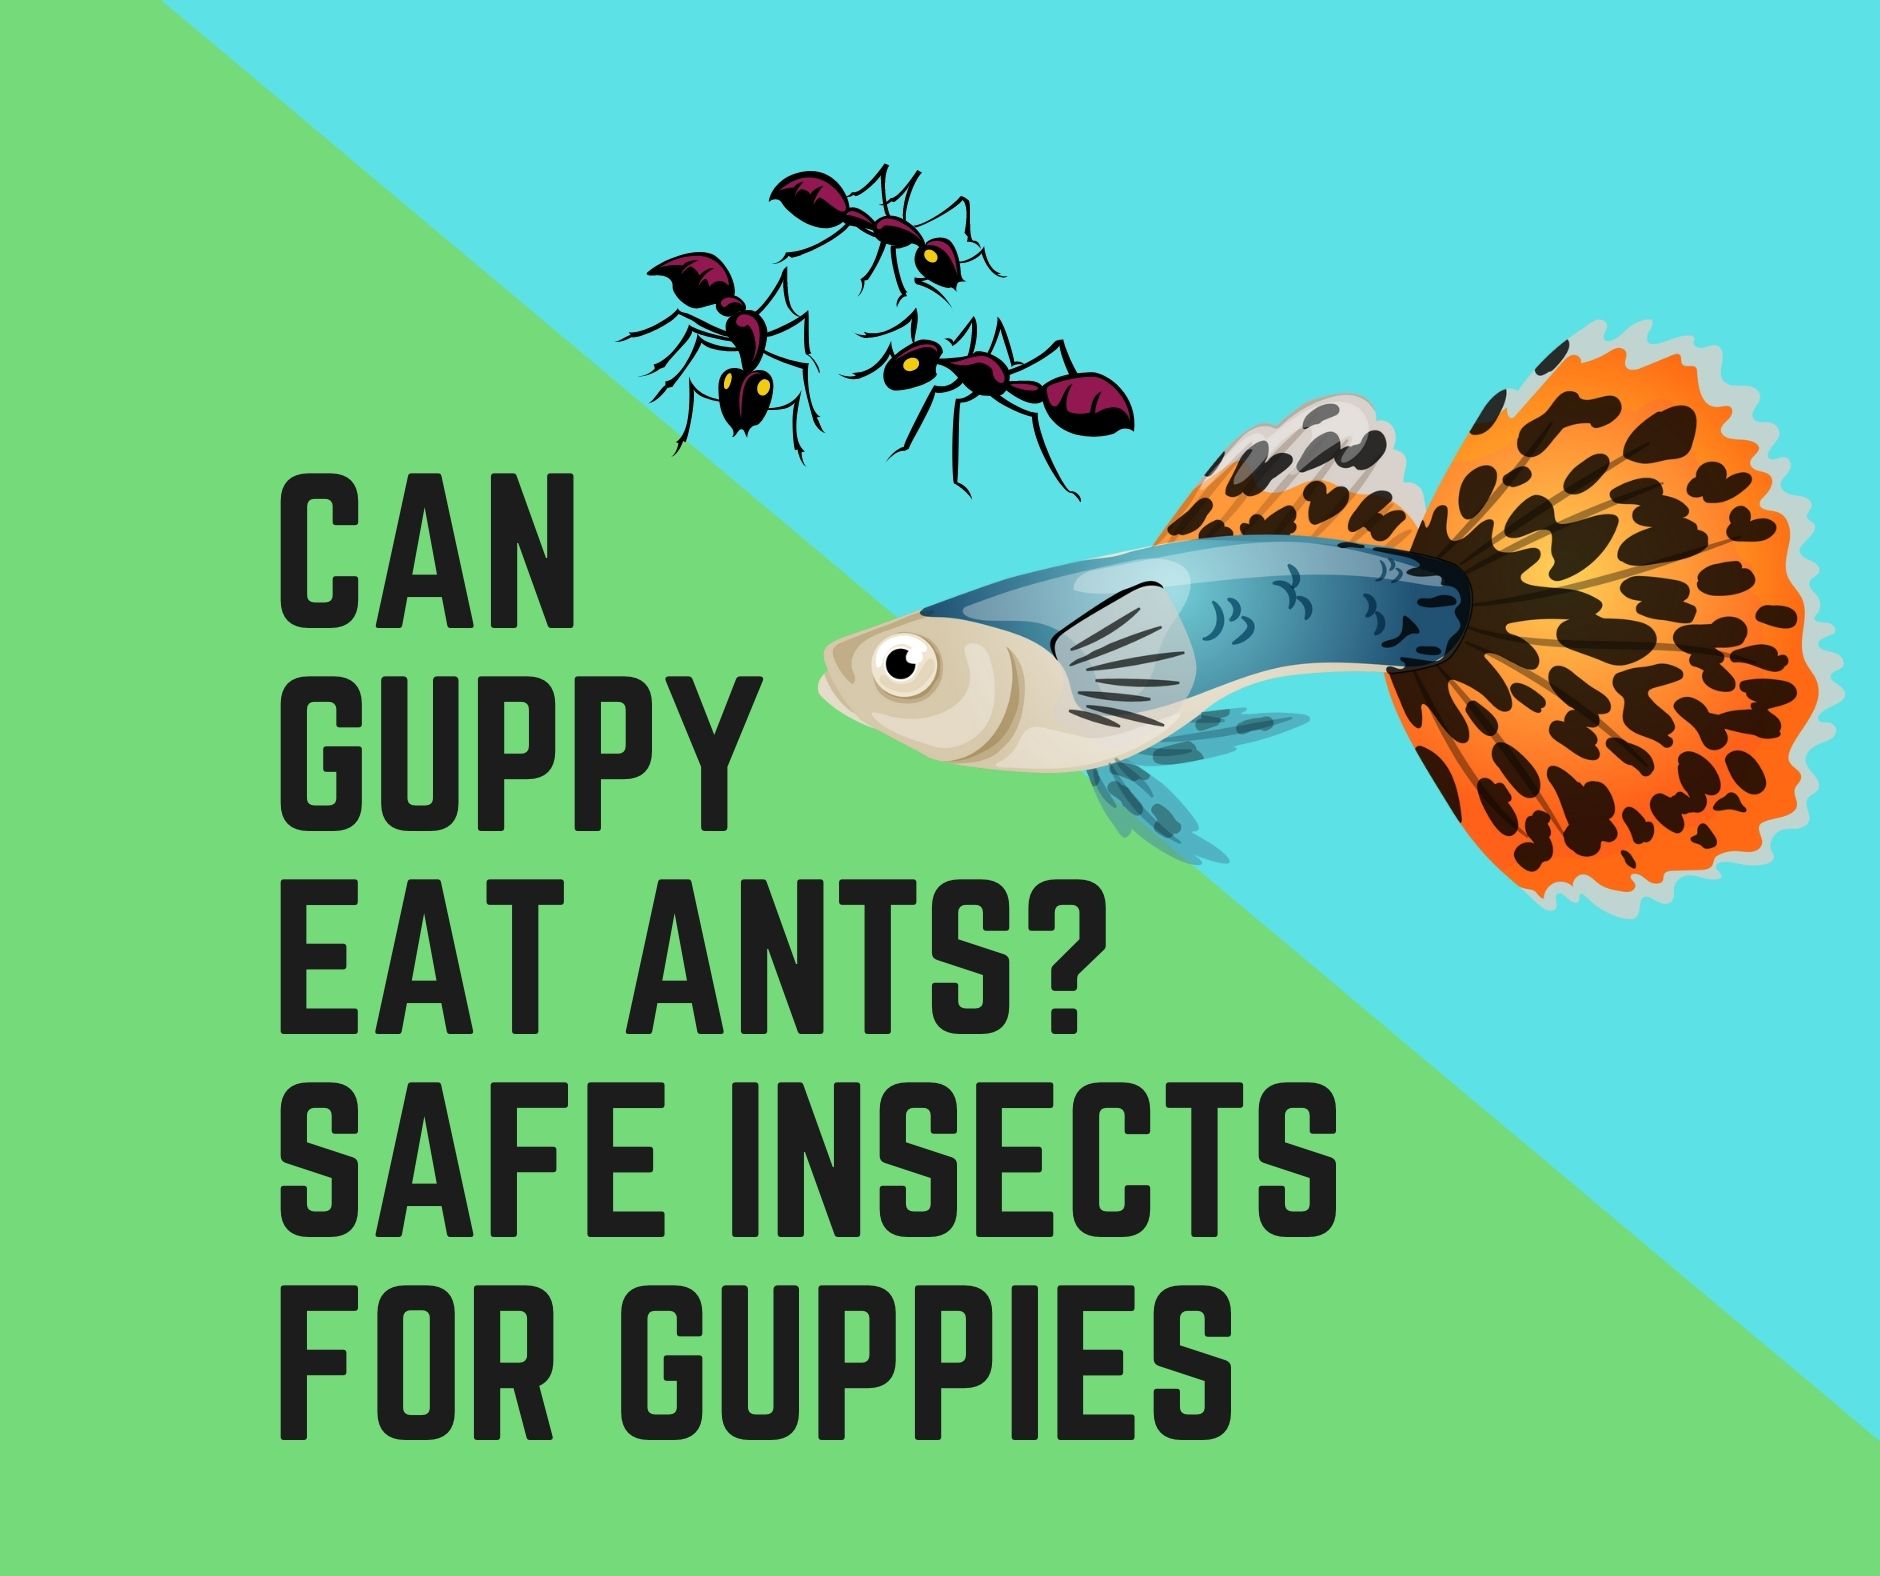 Do Guppies eat Ants and Insects